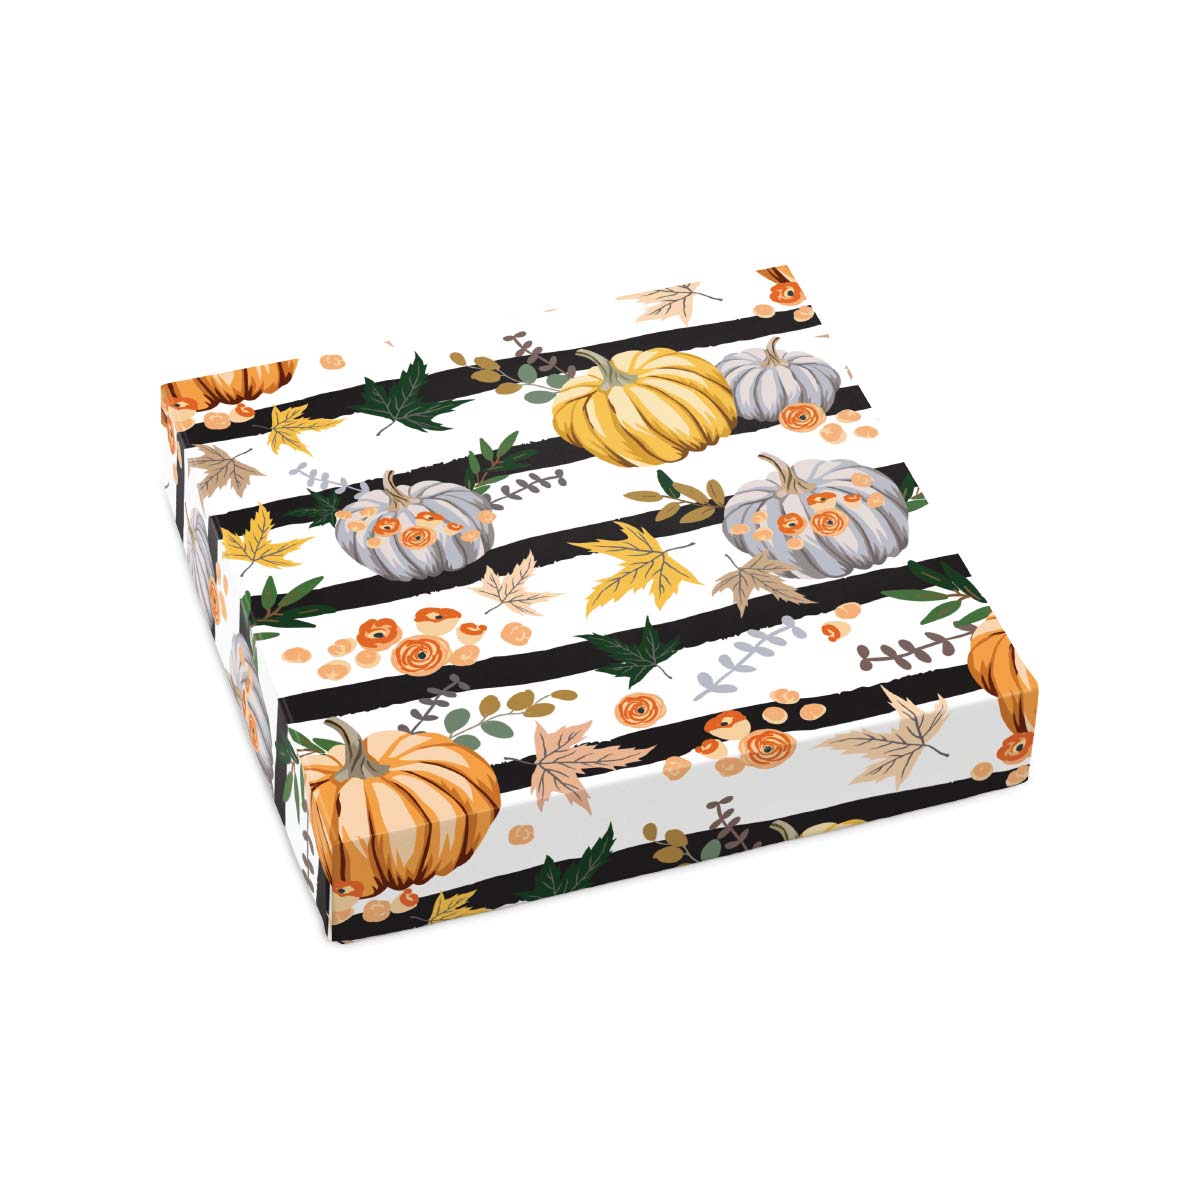 Fall Themed Box Cover for 16 Piece Holiday Assortment